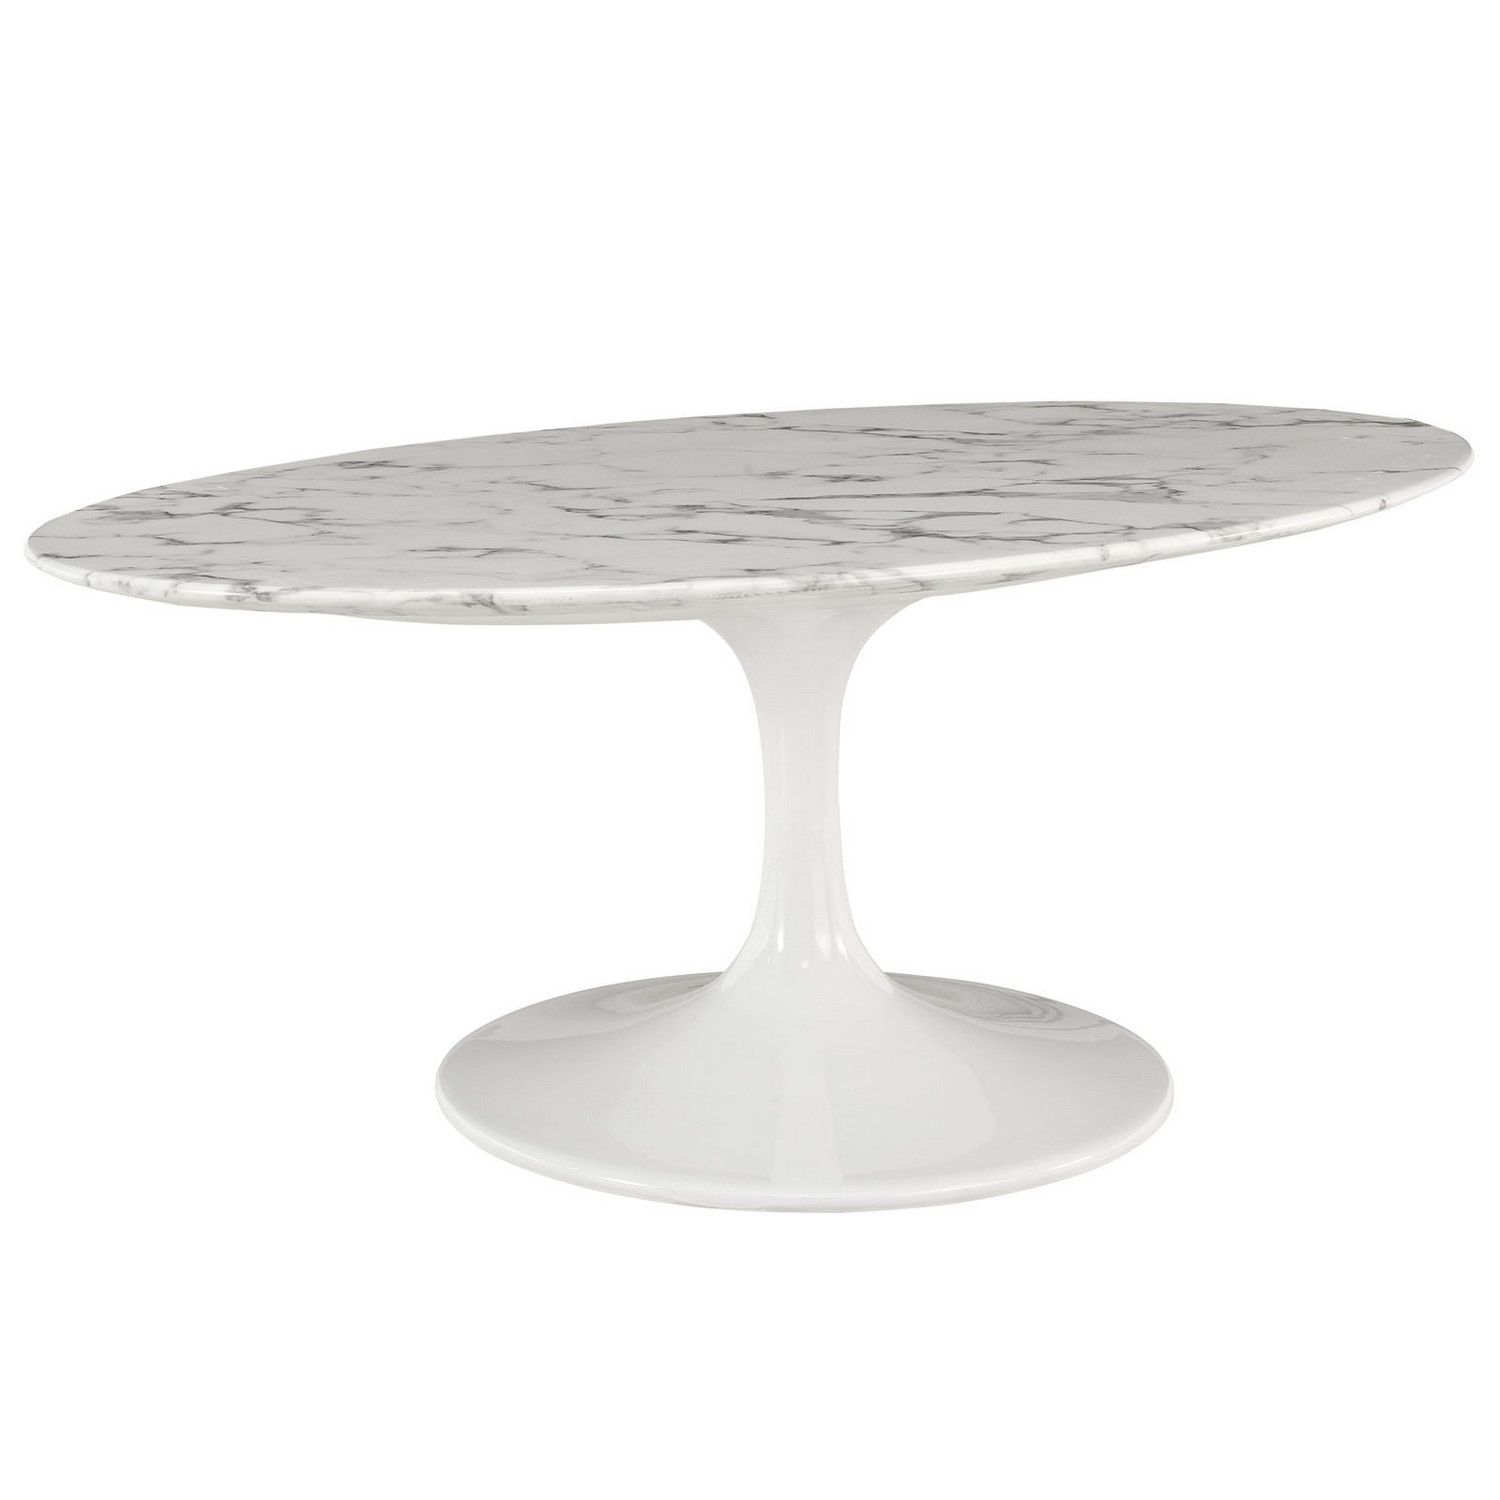 Modway Lippa 42 Oval-Shaped Artificial Marble Coffee Table - White